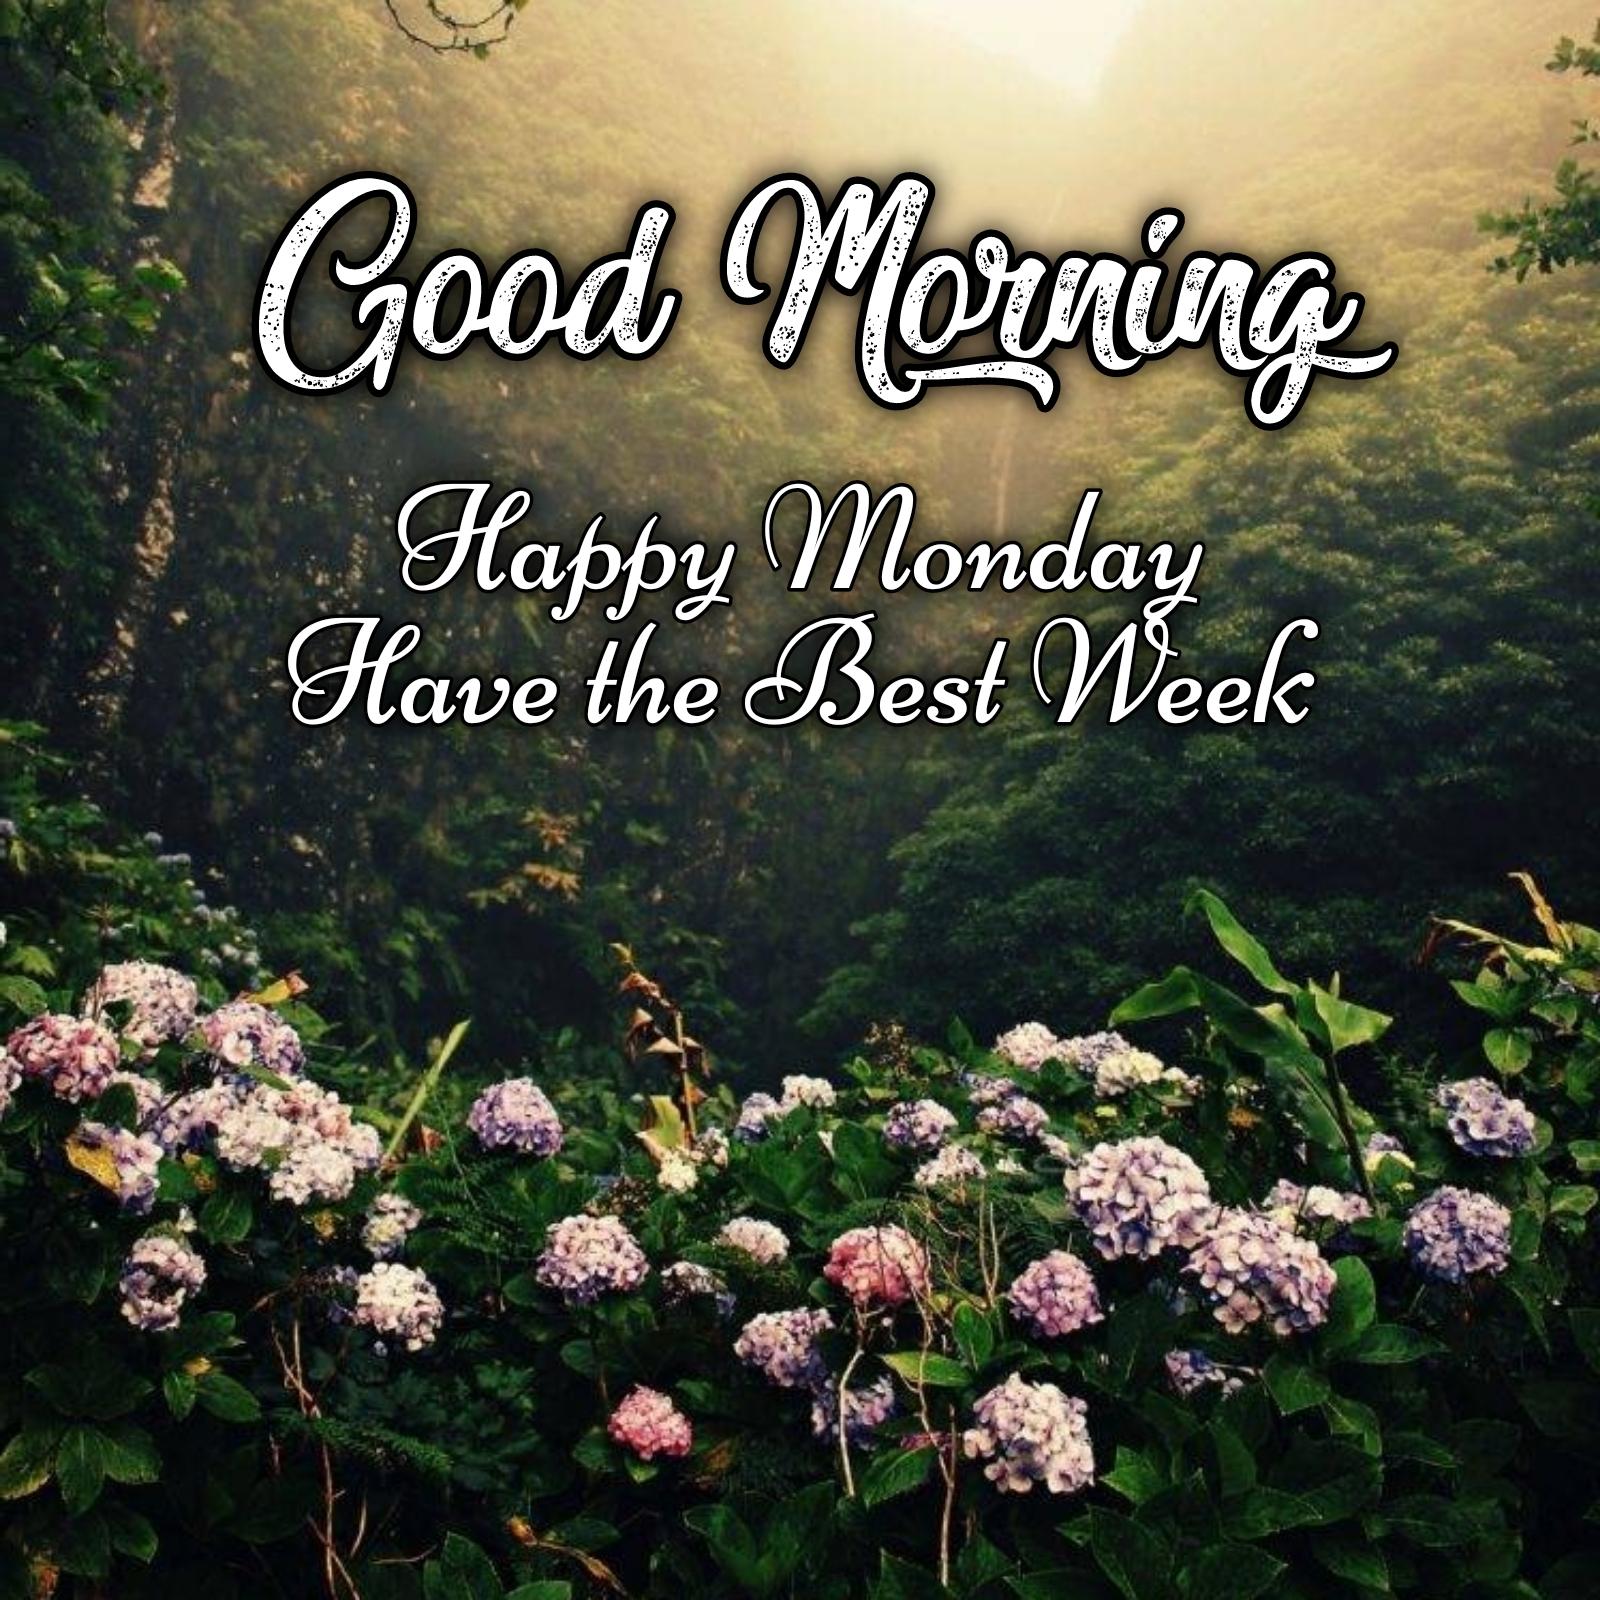 have a blessed week hd